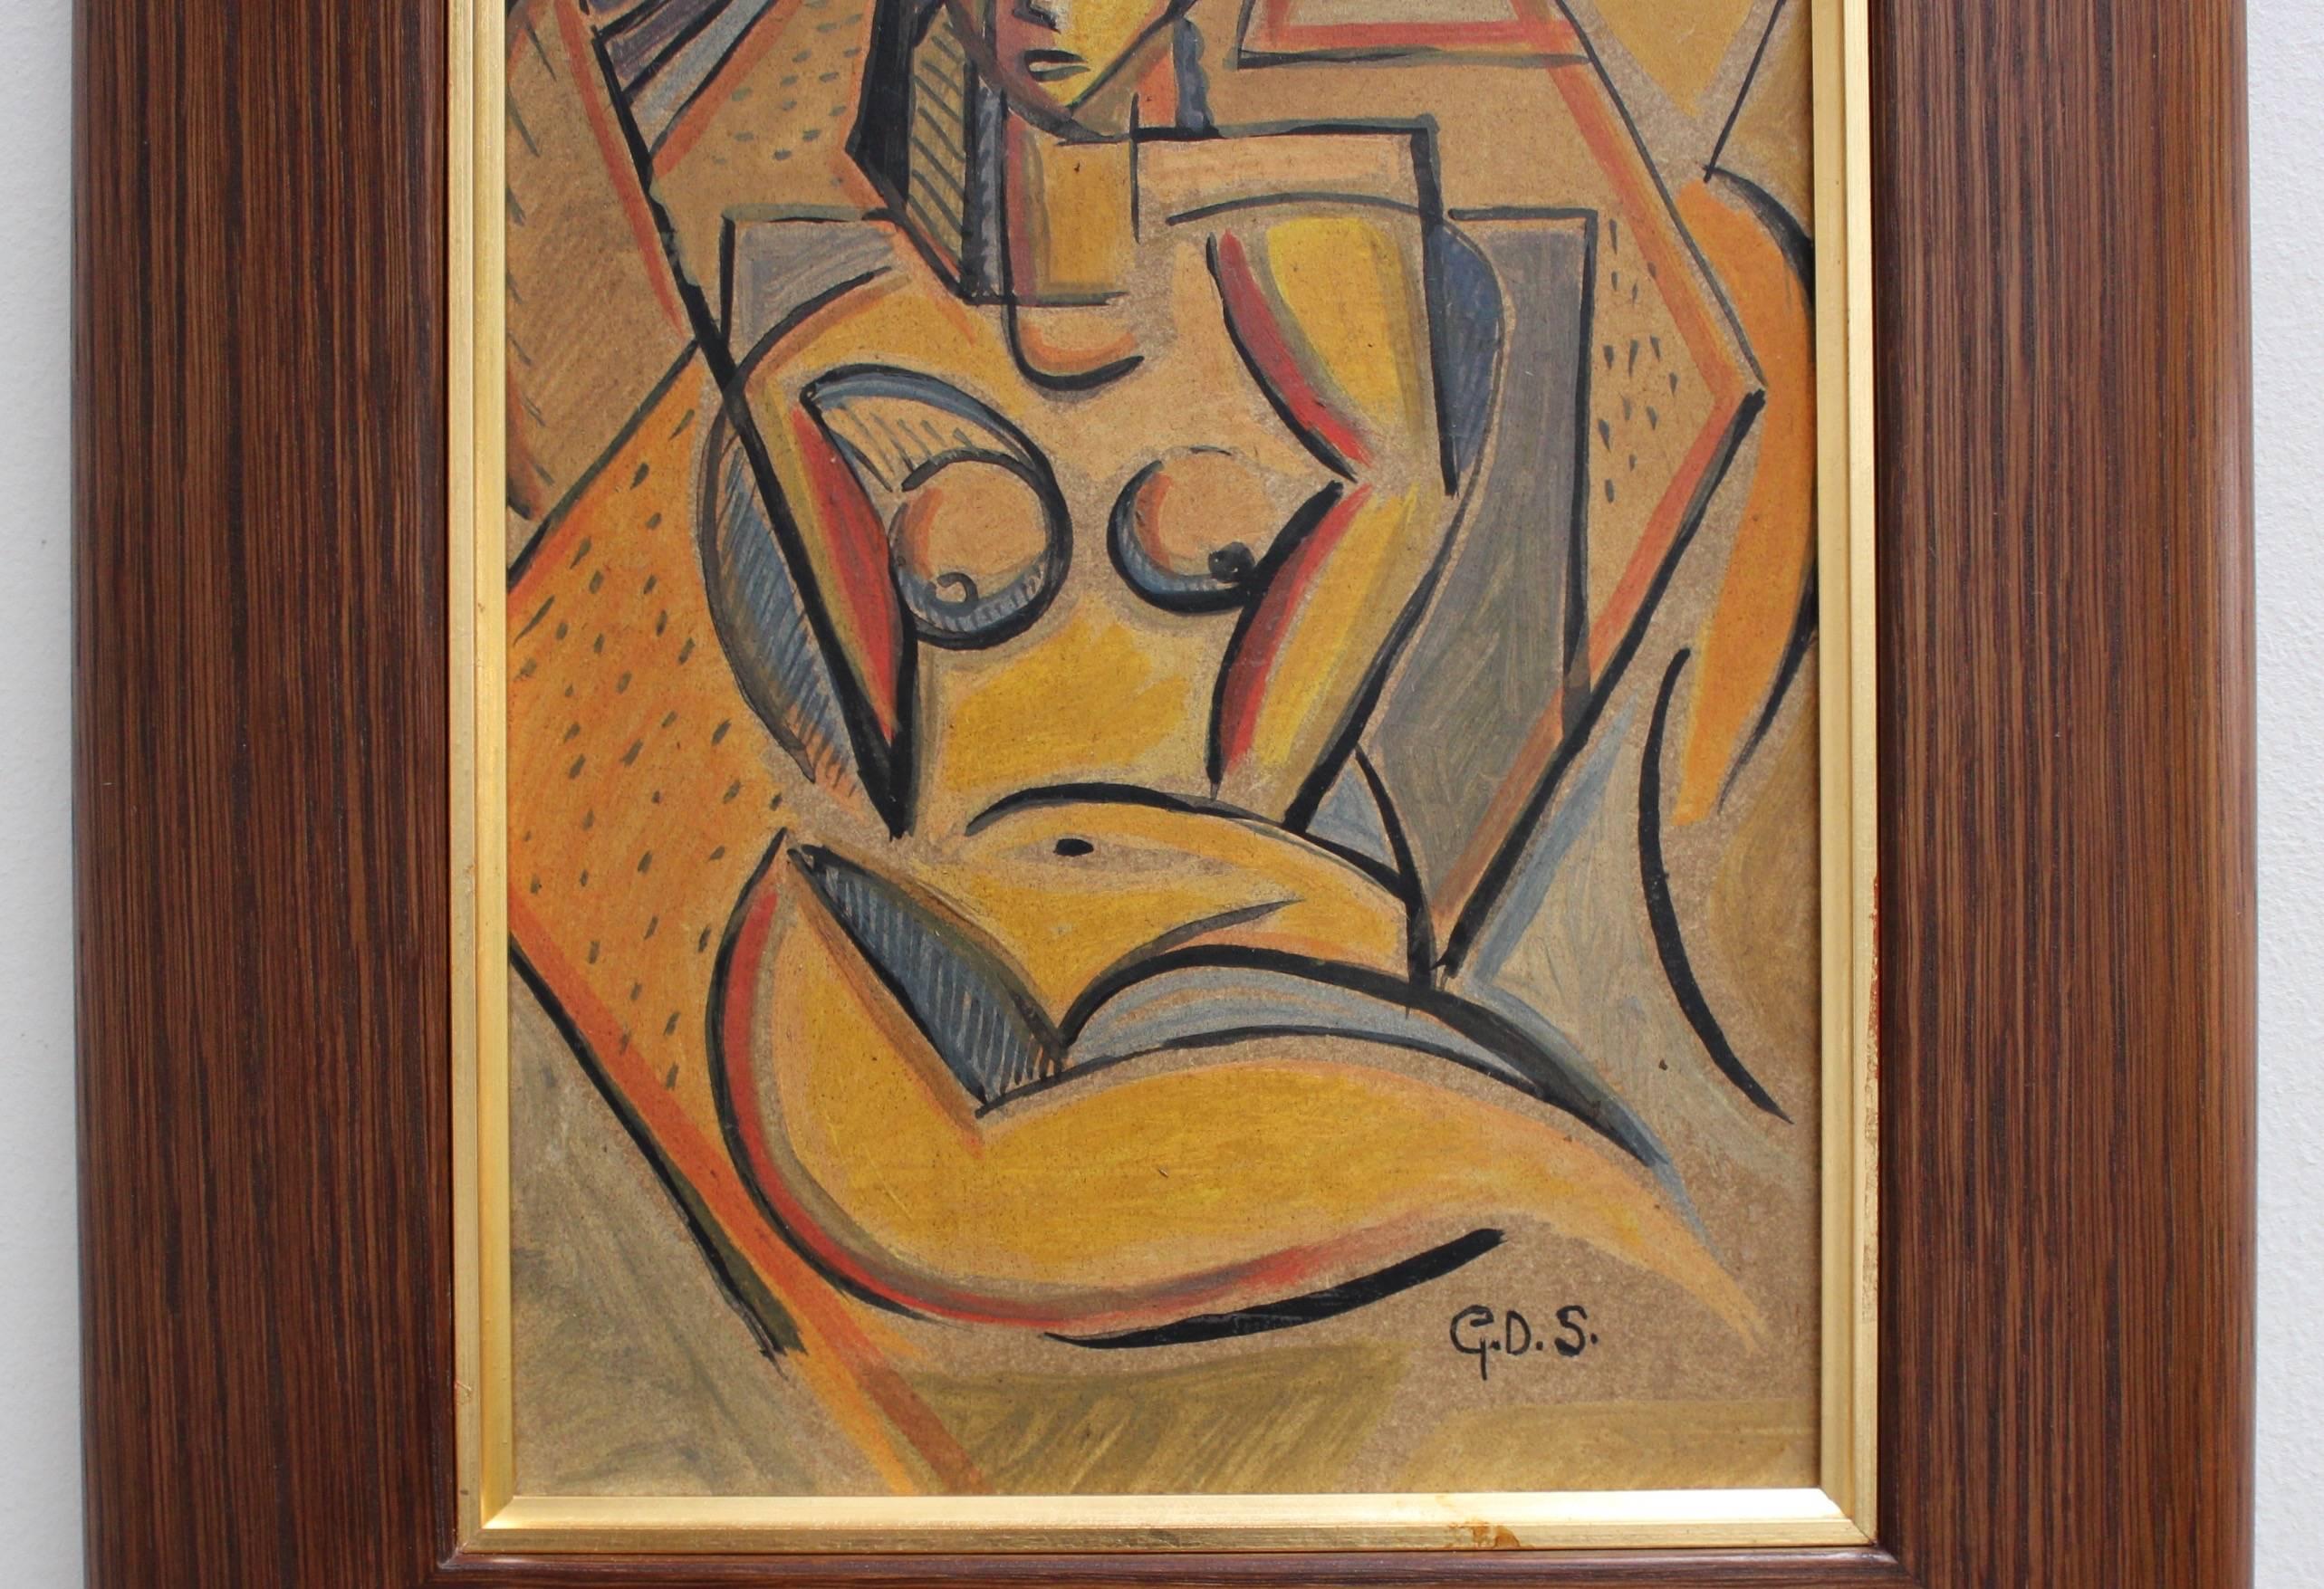 'Portrait of a Sunbathing Nude', oil on board, by artist with the initials GDS (circa 1940s - 1950s). A cubist beauty sunbathes on the beach. The sun is warm, the sand is hot and a cool breeze blows over the subject. The hues of yellow, orange, red